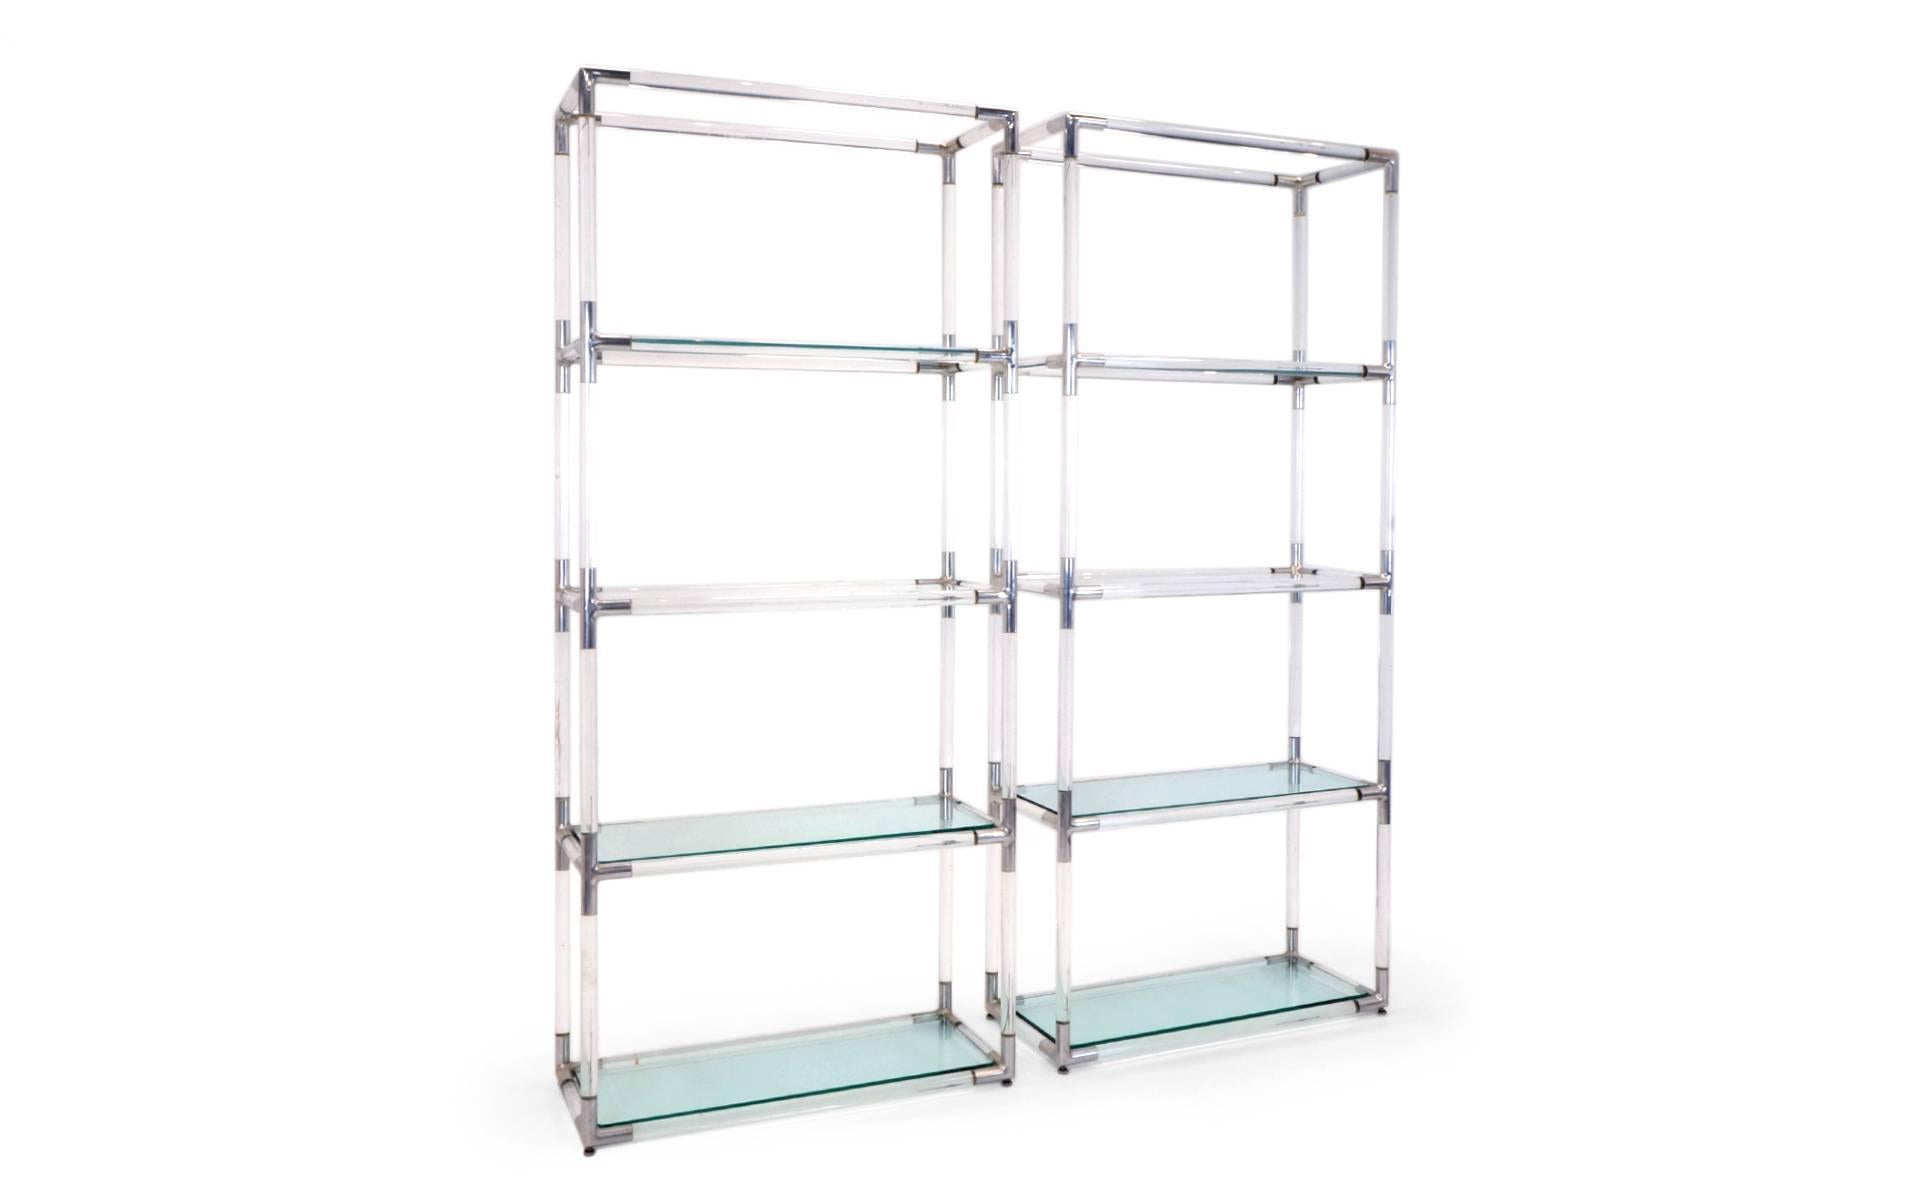 Pair tubular of Lucite storage shelf systems with polished aluminium joinery and glass shelves. The two lowest shelves are 1/2 glass to add bottom weight and the rest of the shelves are 3/8